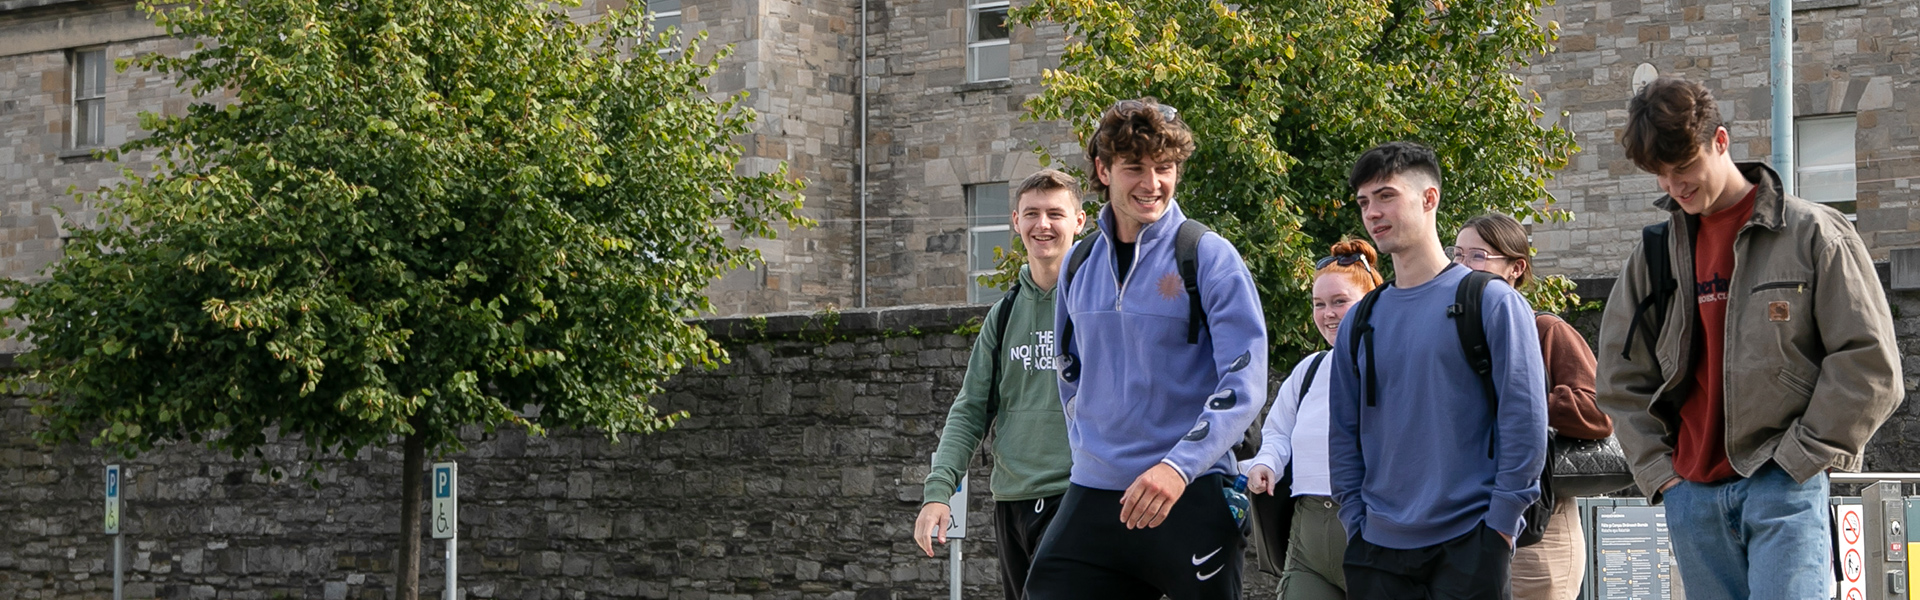 student group laughing outdoors grangegorman